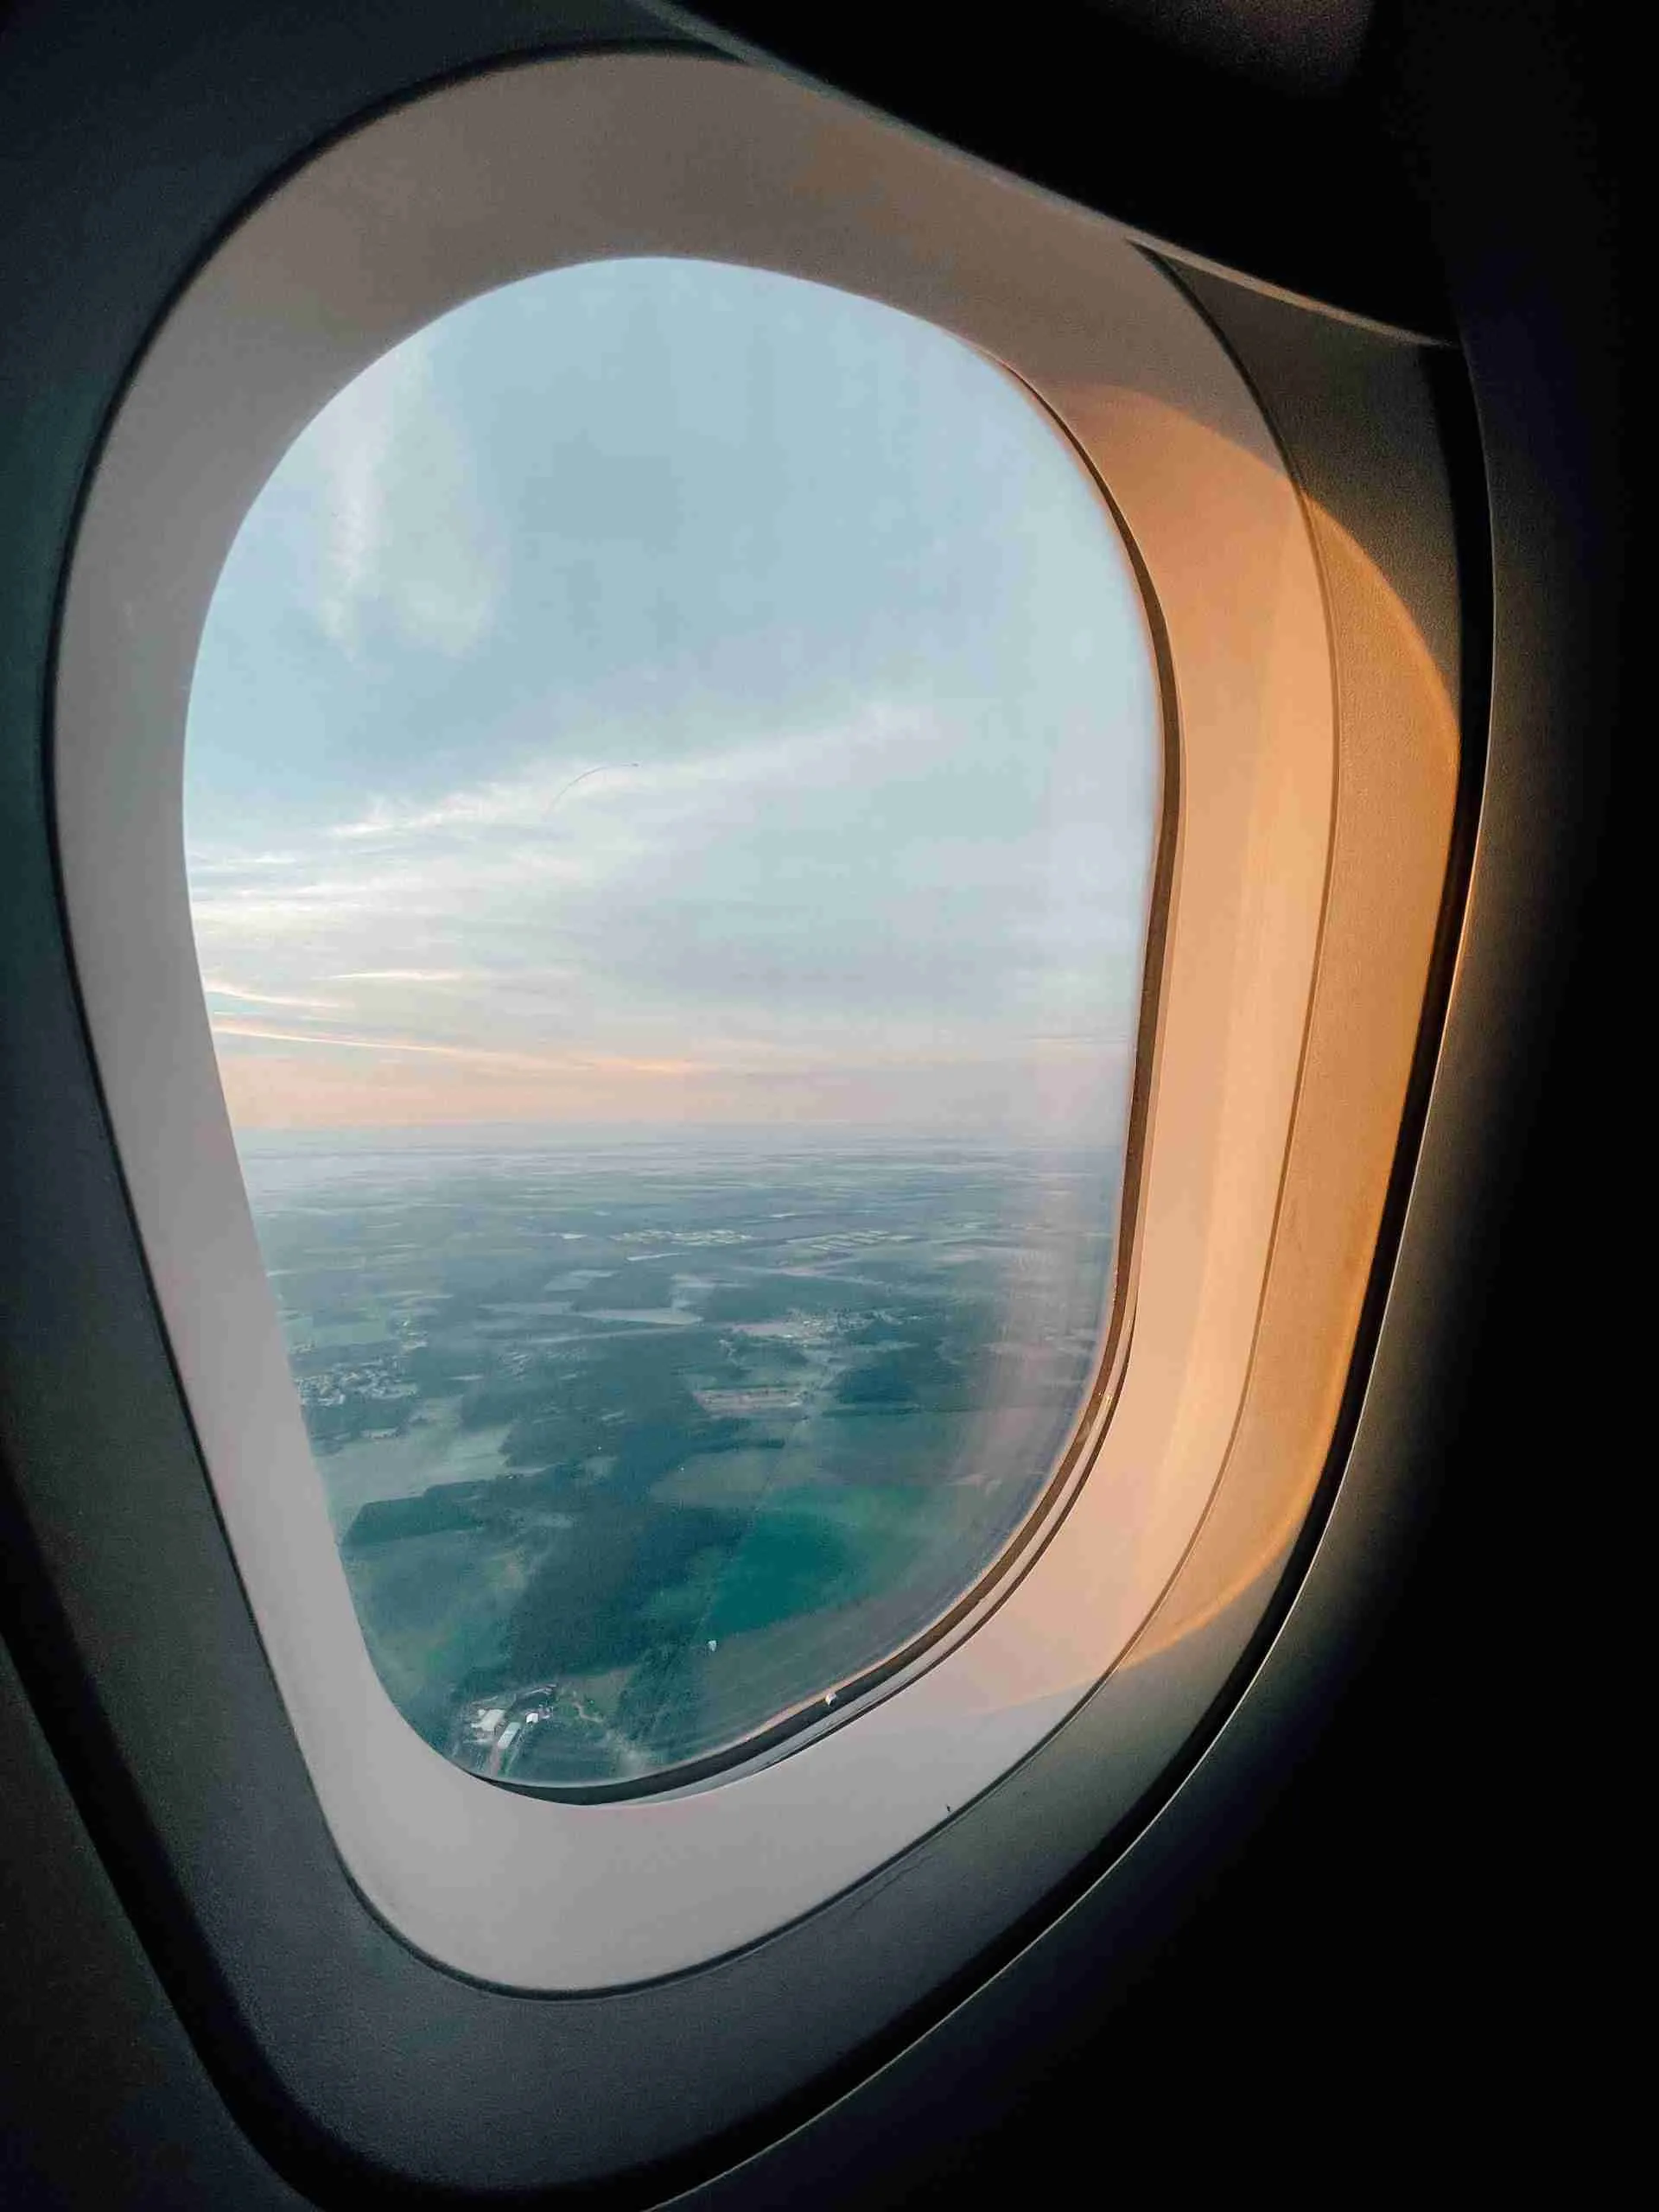 View from a plane window - finding flights is one of the most essential steps to travel planning! 